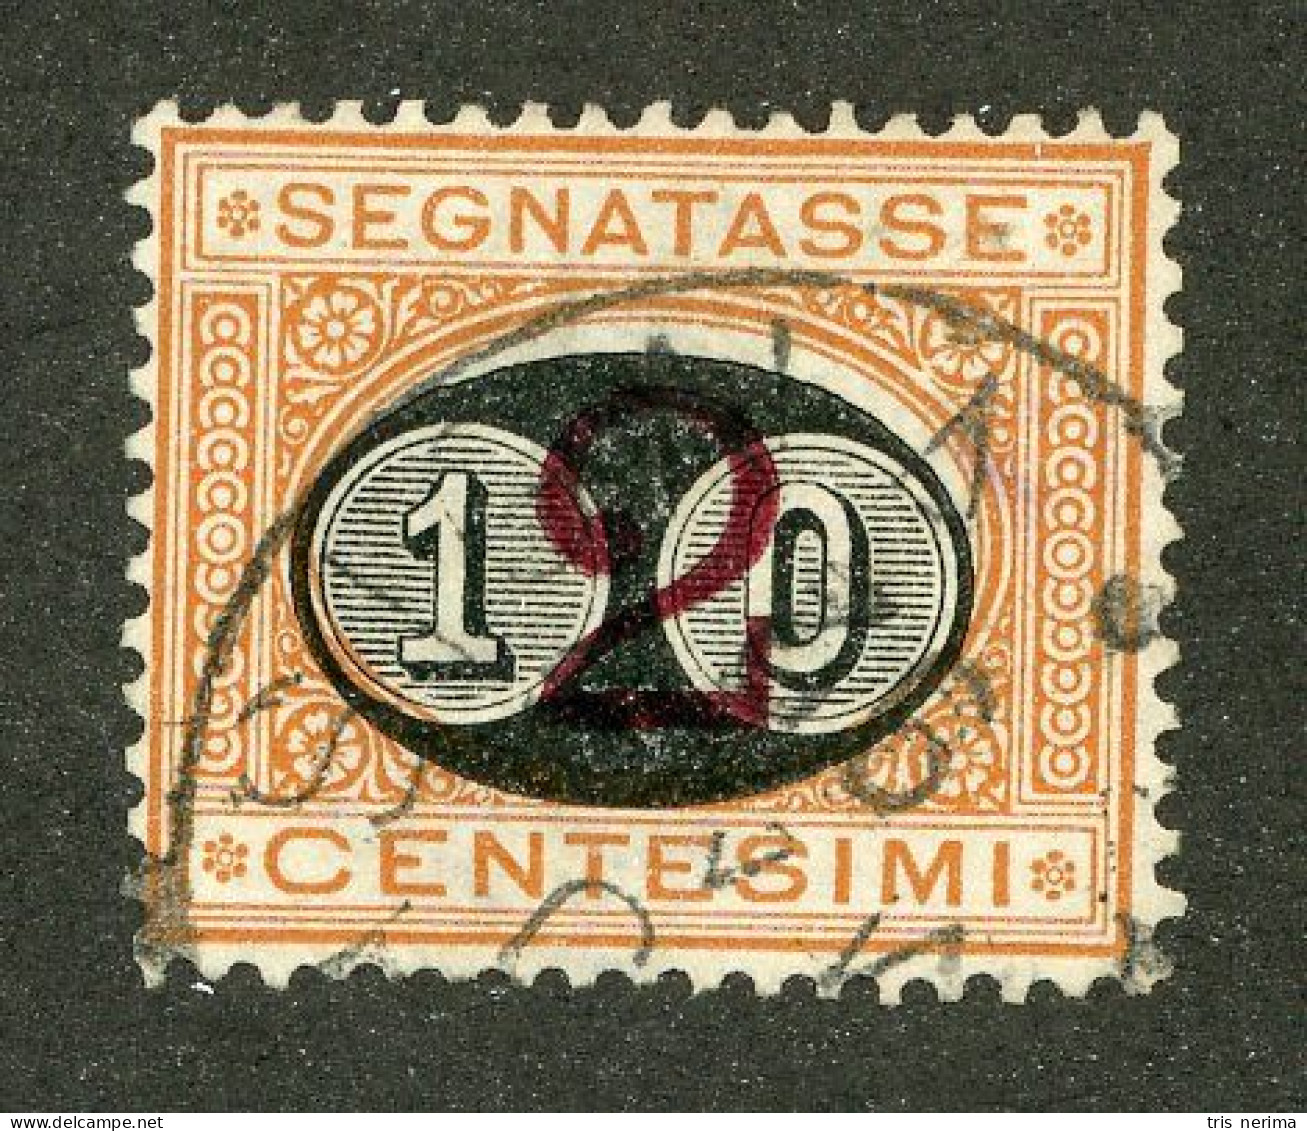 833 Italy 1890 Scott #J25 Used (Lower Bids 20% Off) - Postage Due